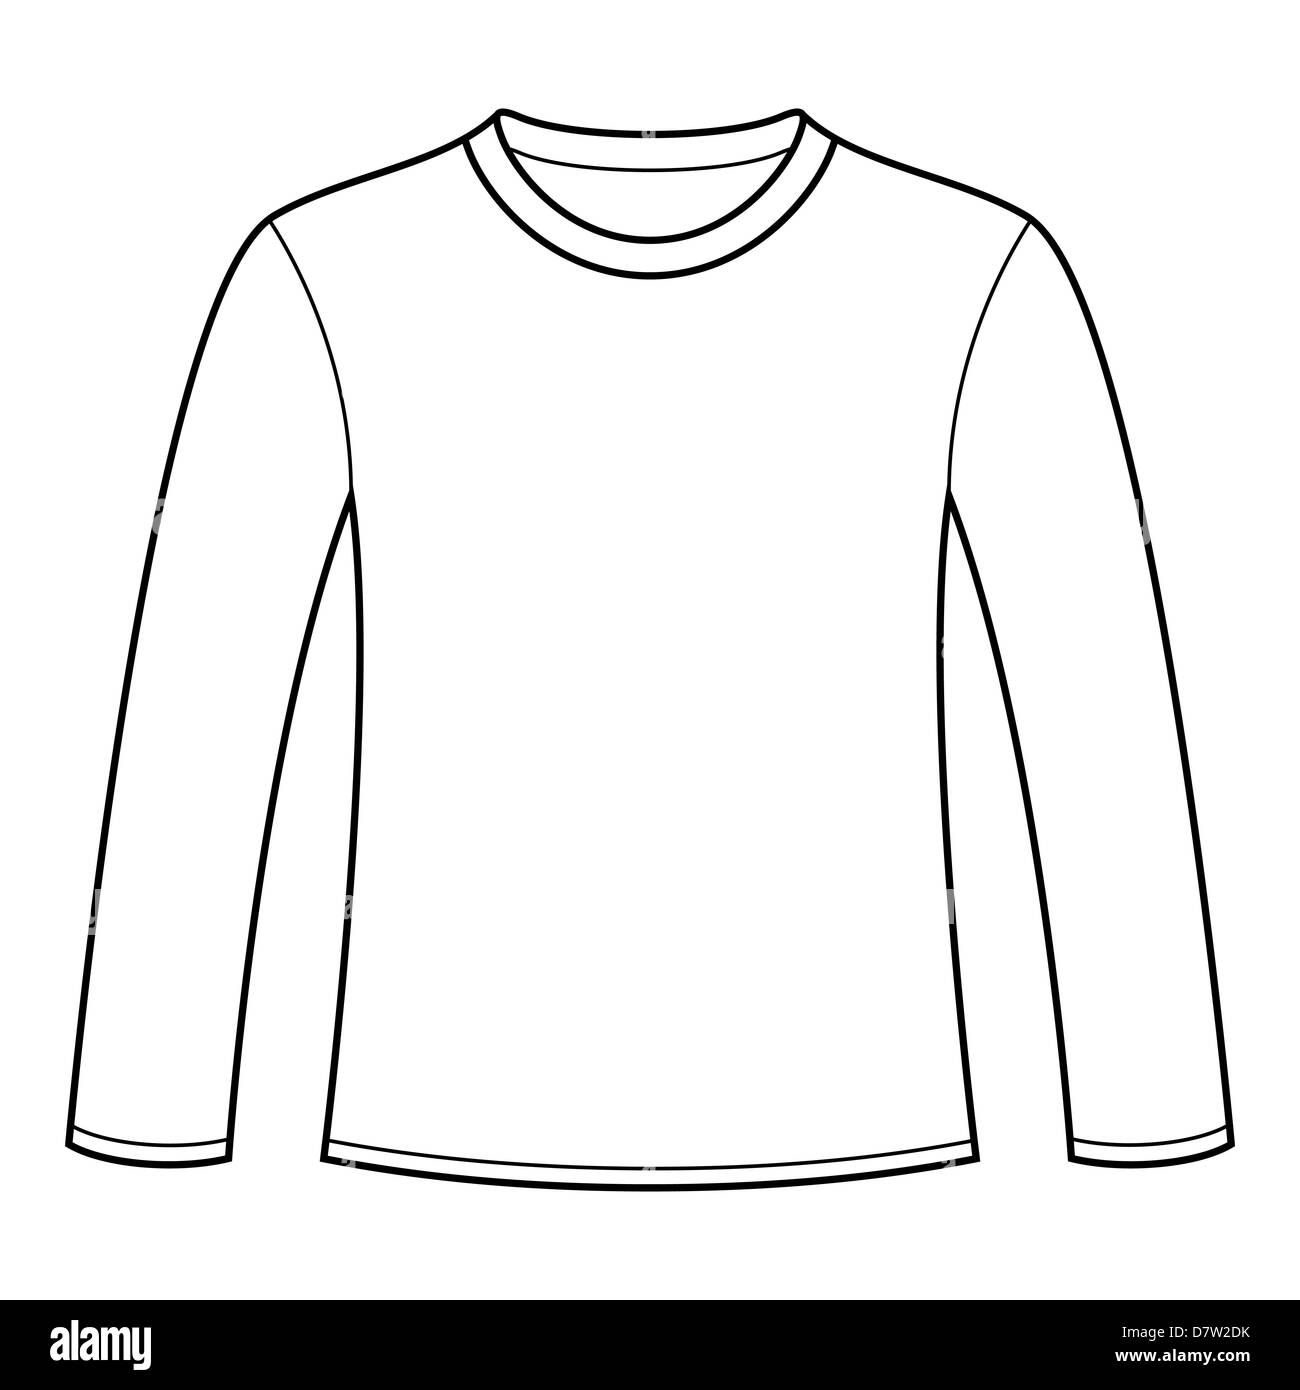 Long-sleeved T-shirt template Stock Photo - Alamy